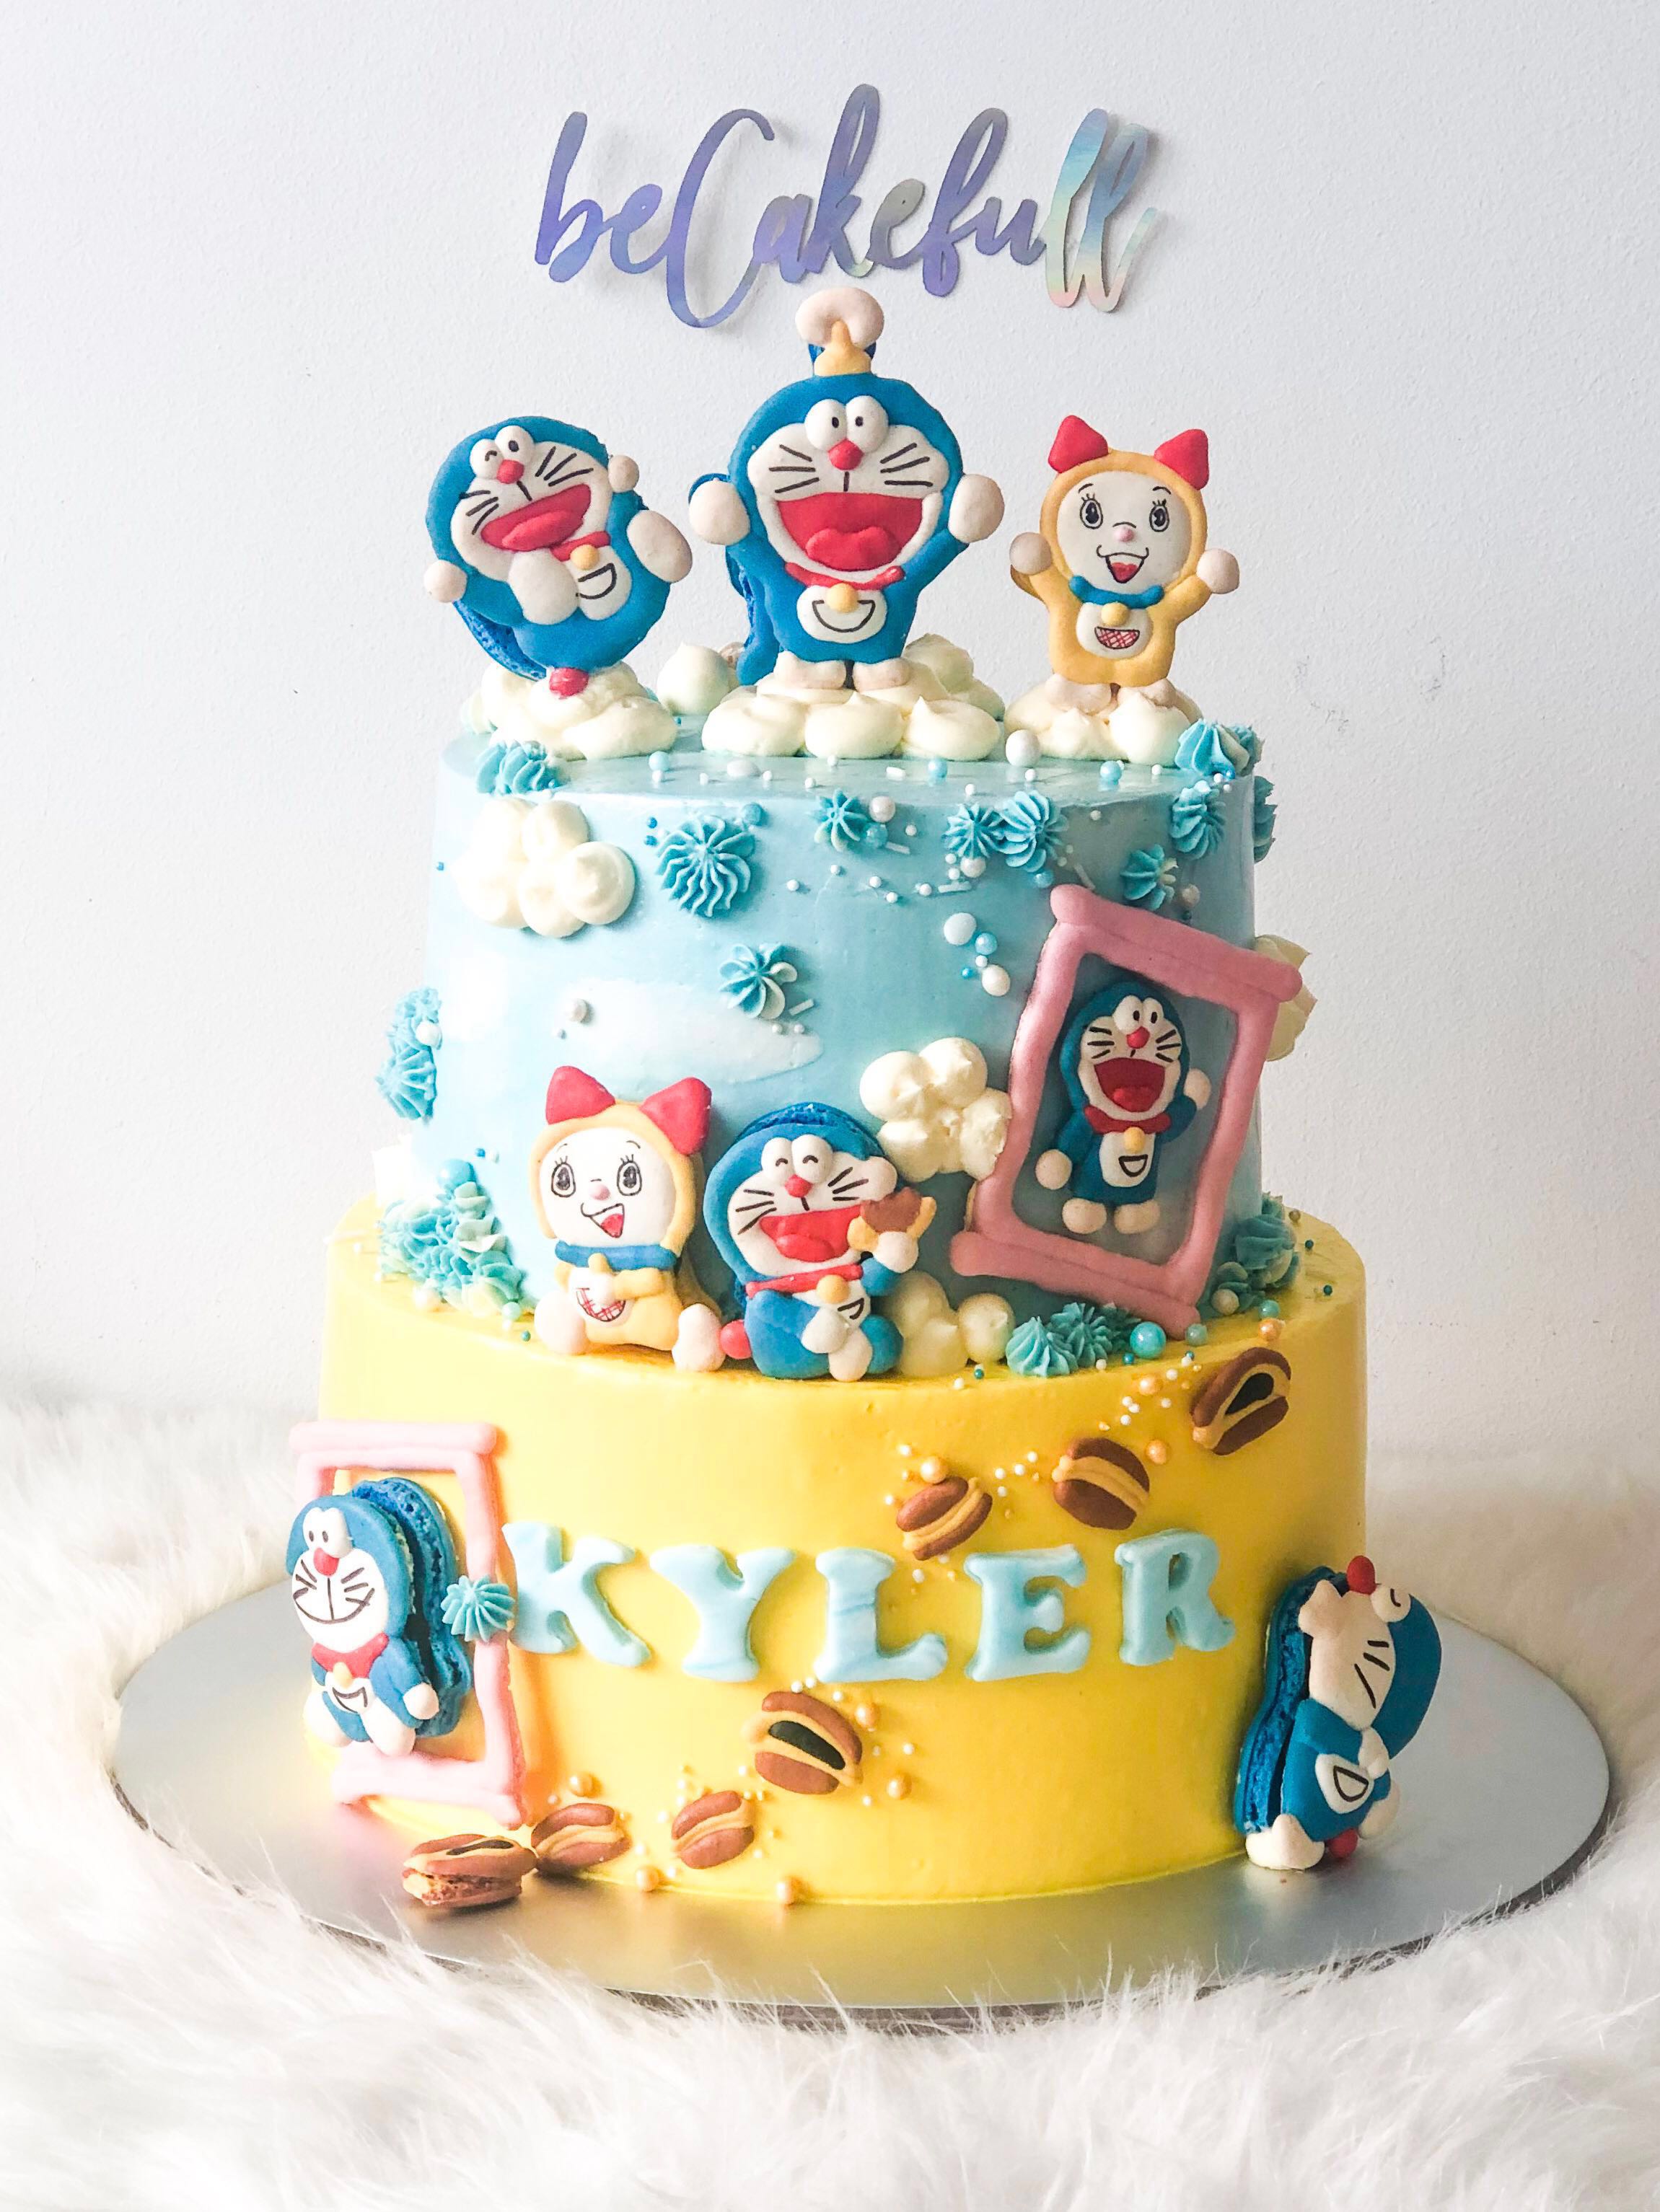 Doraemon Cake Available in Saharanpur - www.giftcakes.in